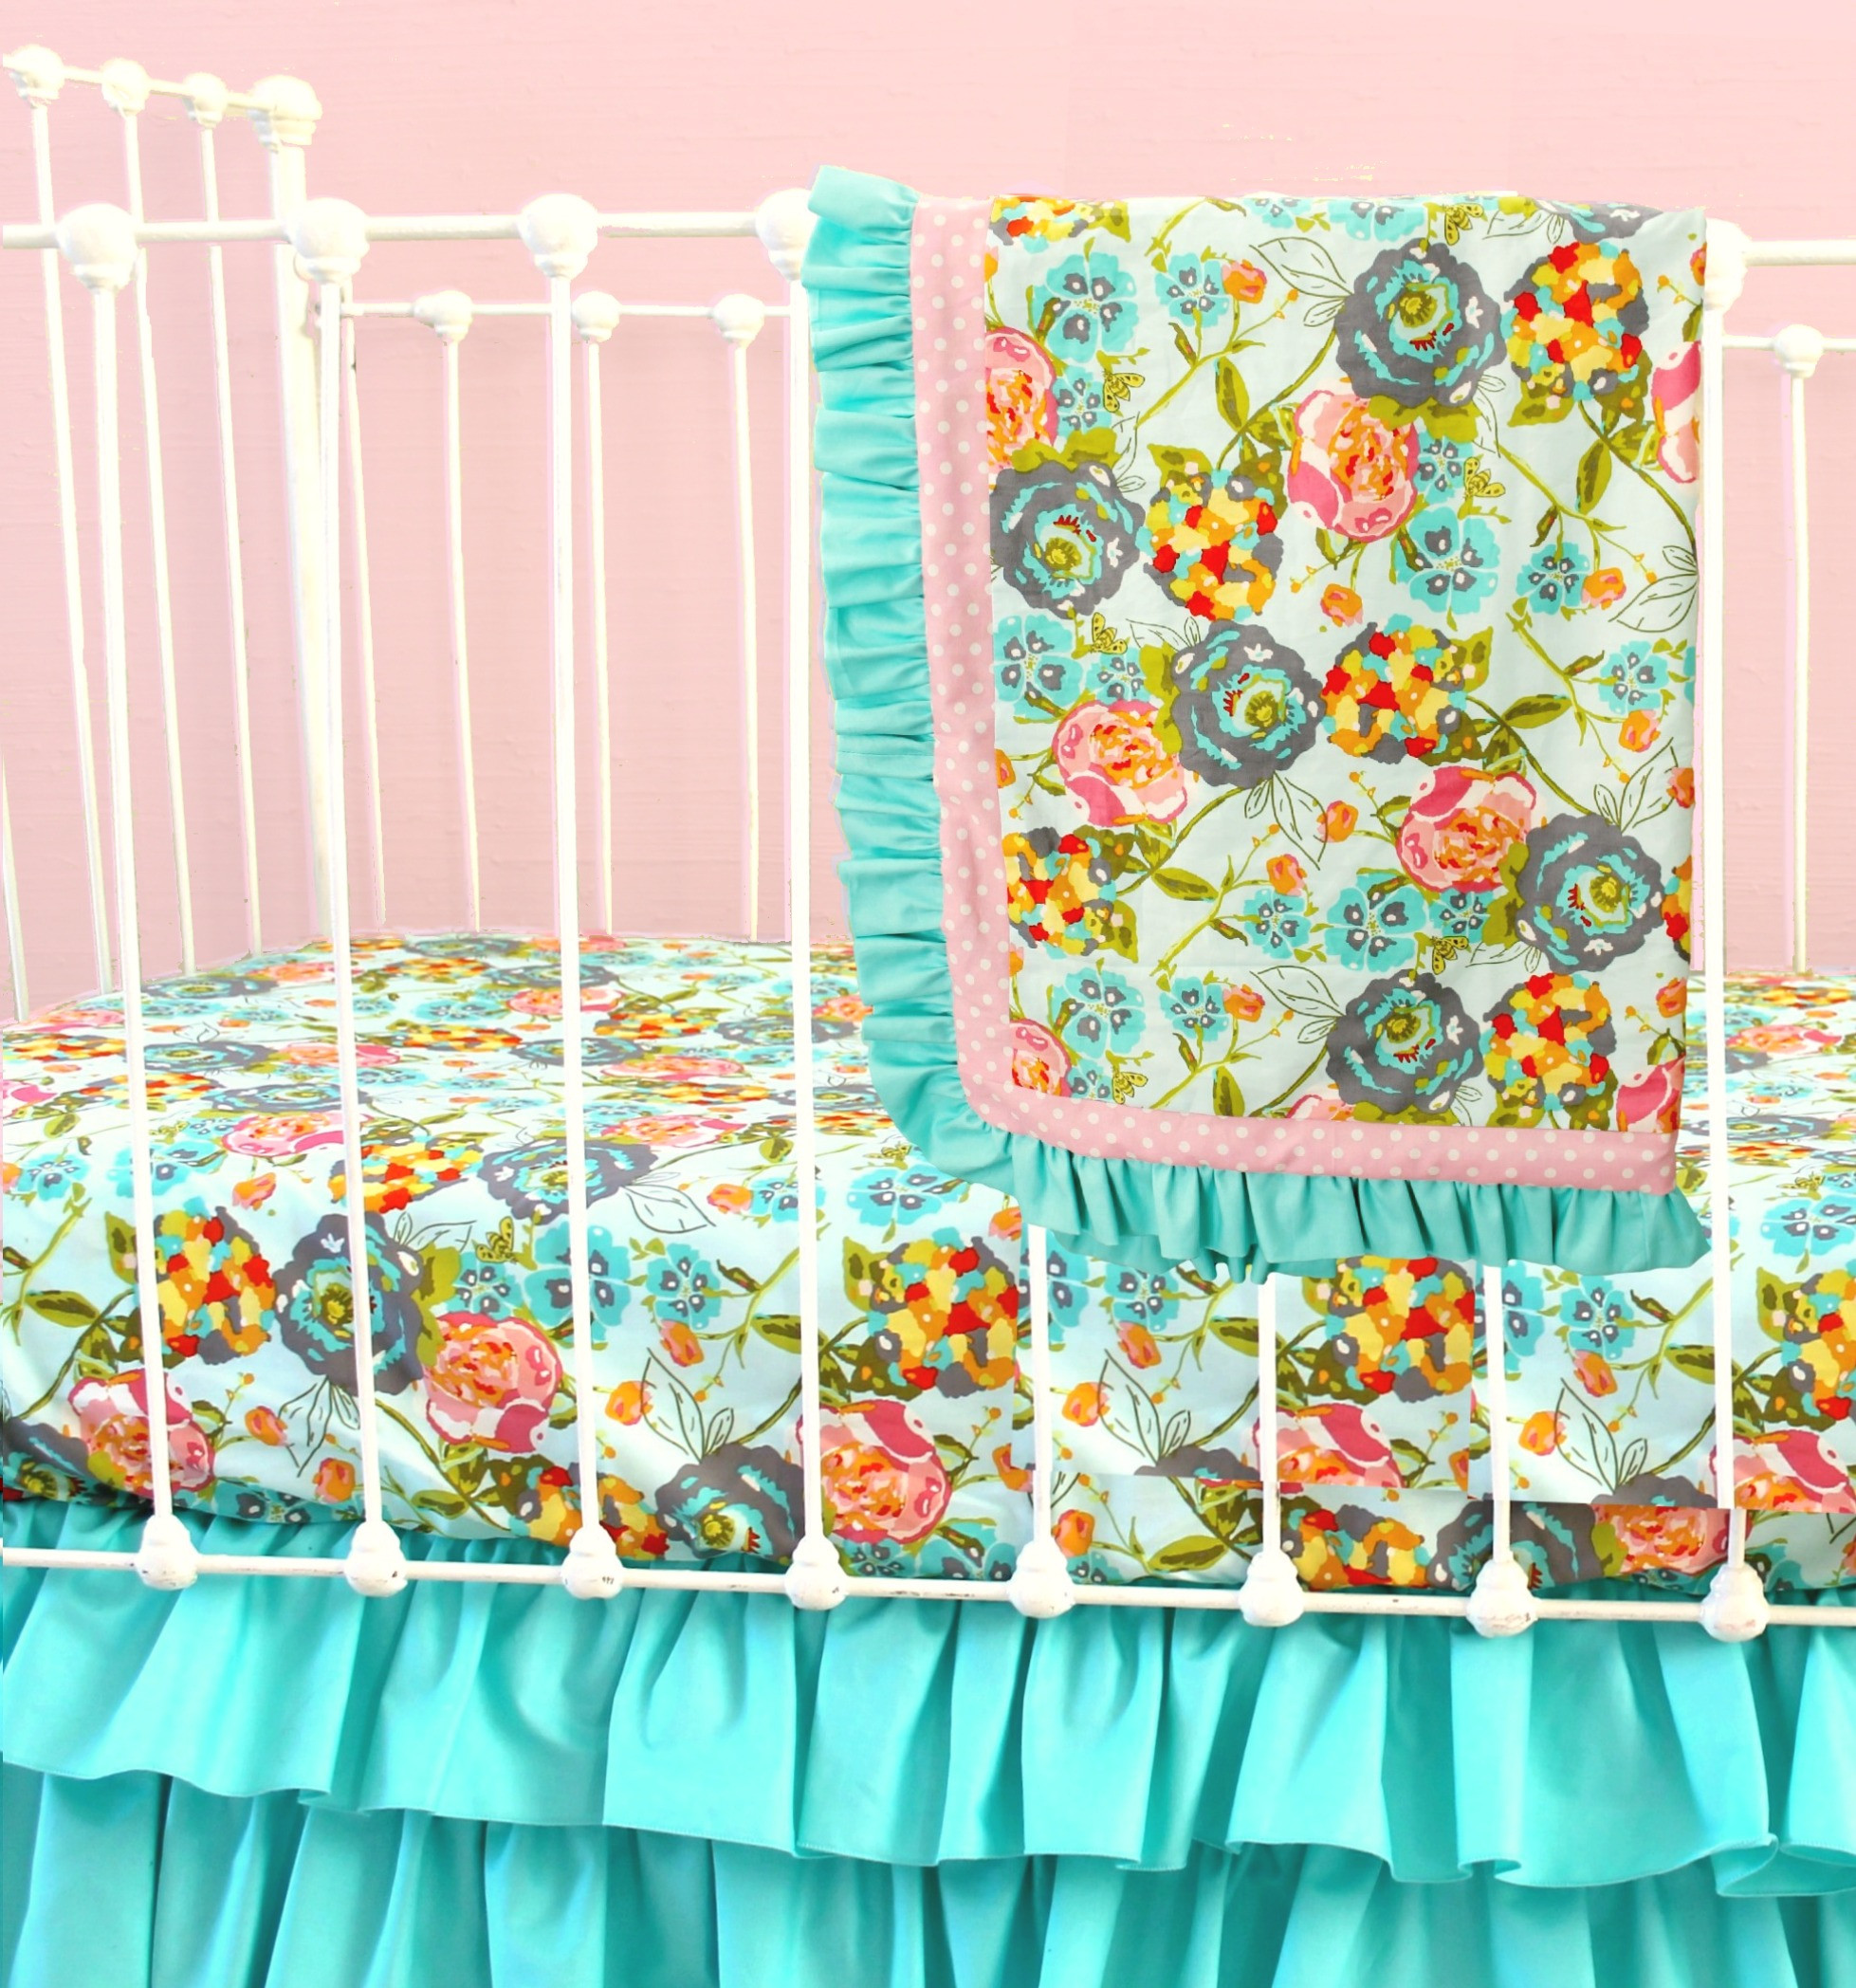 Belle Baby Bedding And Decor
 Lily Belle Blend Bumperless Baby Bedding Lottie Da Baby